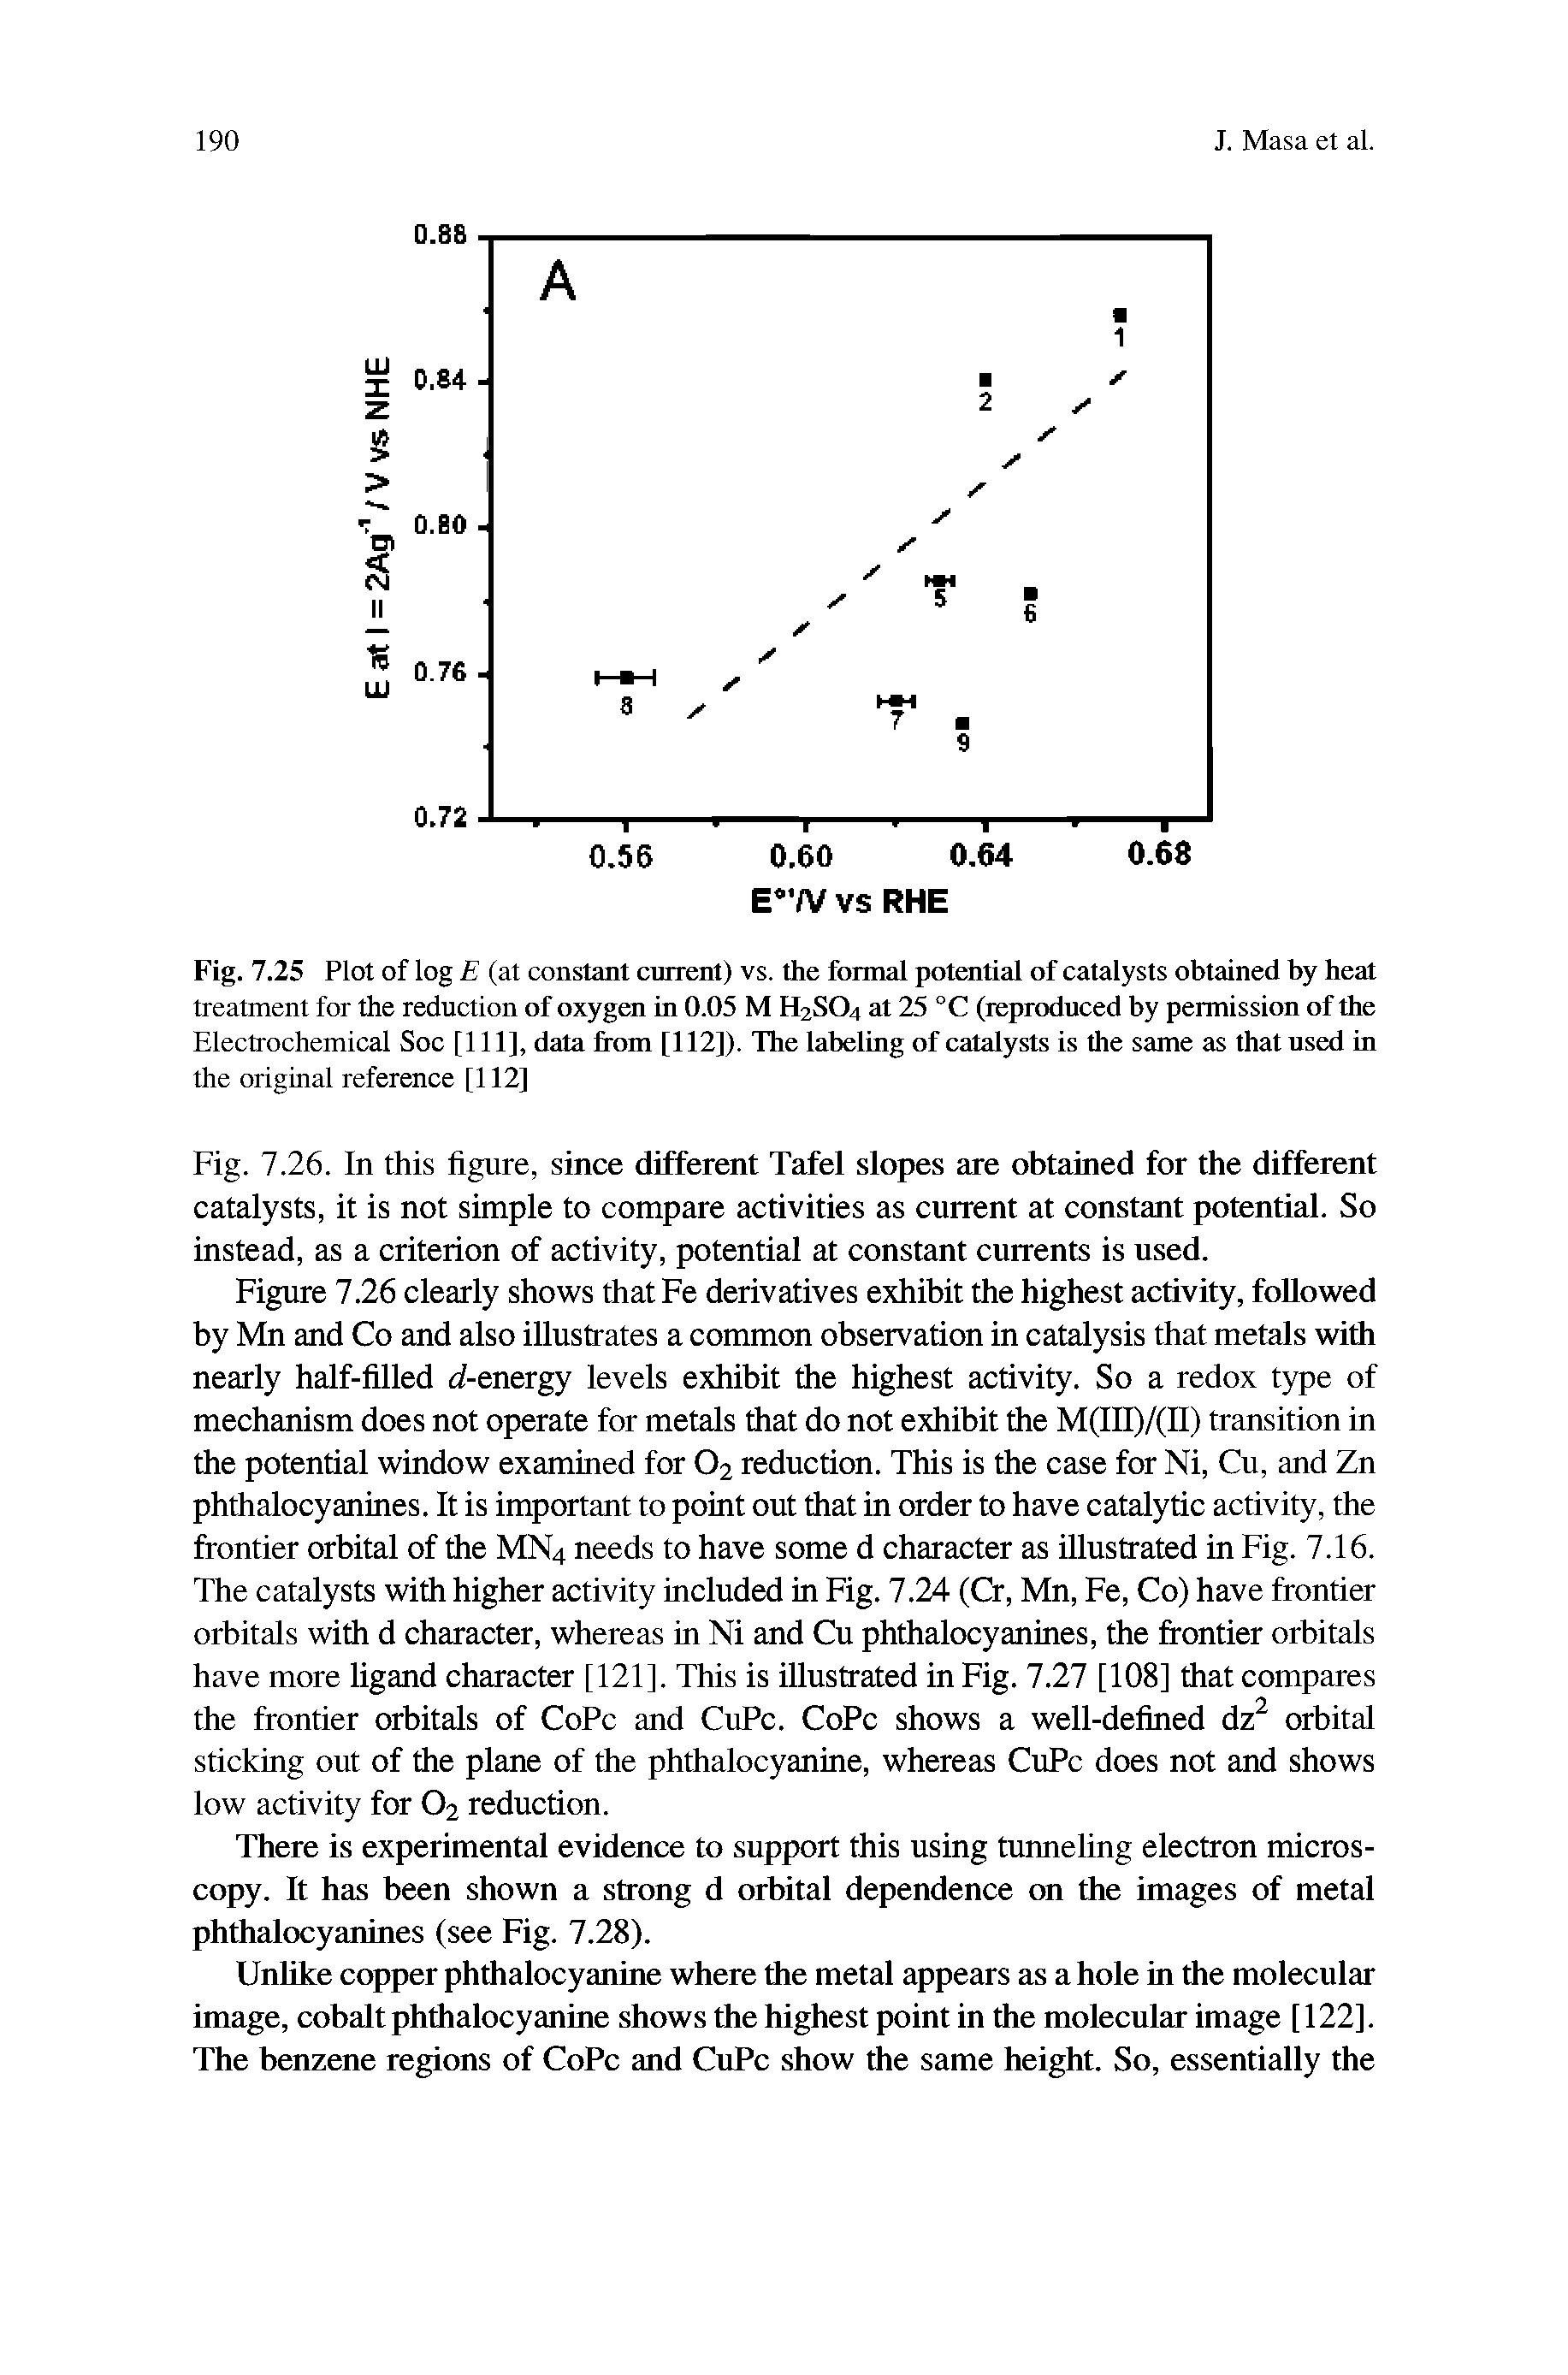 Fig. 7.25 Plot of log E (at constant current) vs. the formal potential of catalysts obtained by heat treatment for the reduction of oxygen in 0.05 M H2SO4 at 25 °C (reproduced by permission of the Electrochemical Soc [111], data from [112]). The laheling of catalysts is the same as that used in the original reference [112]...